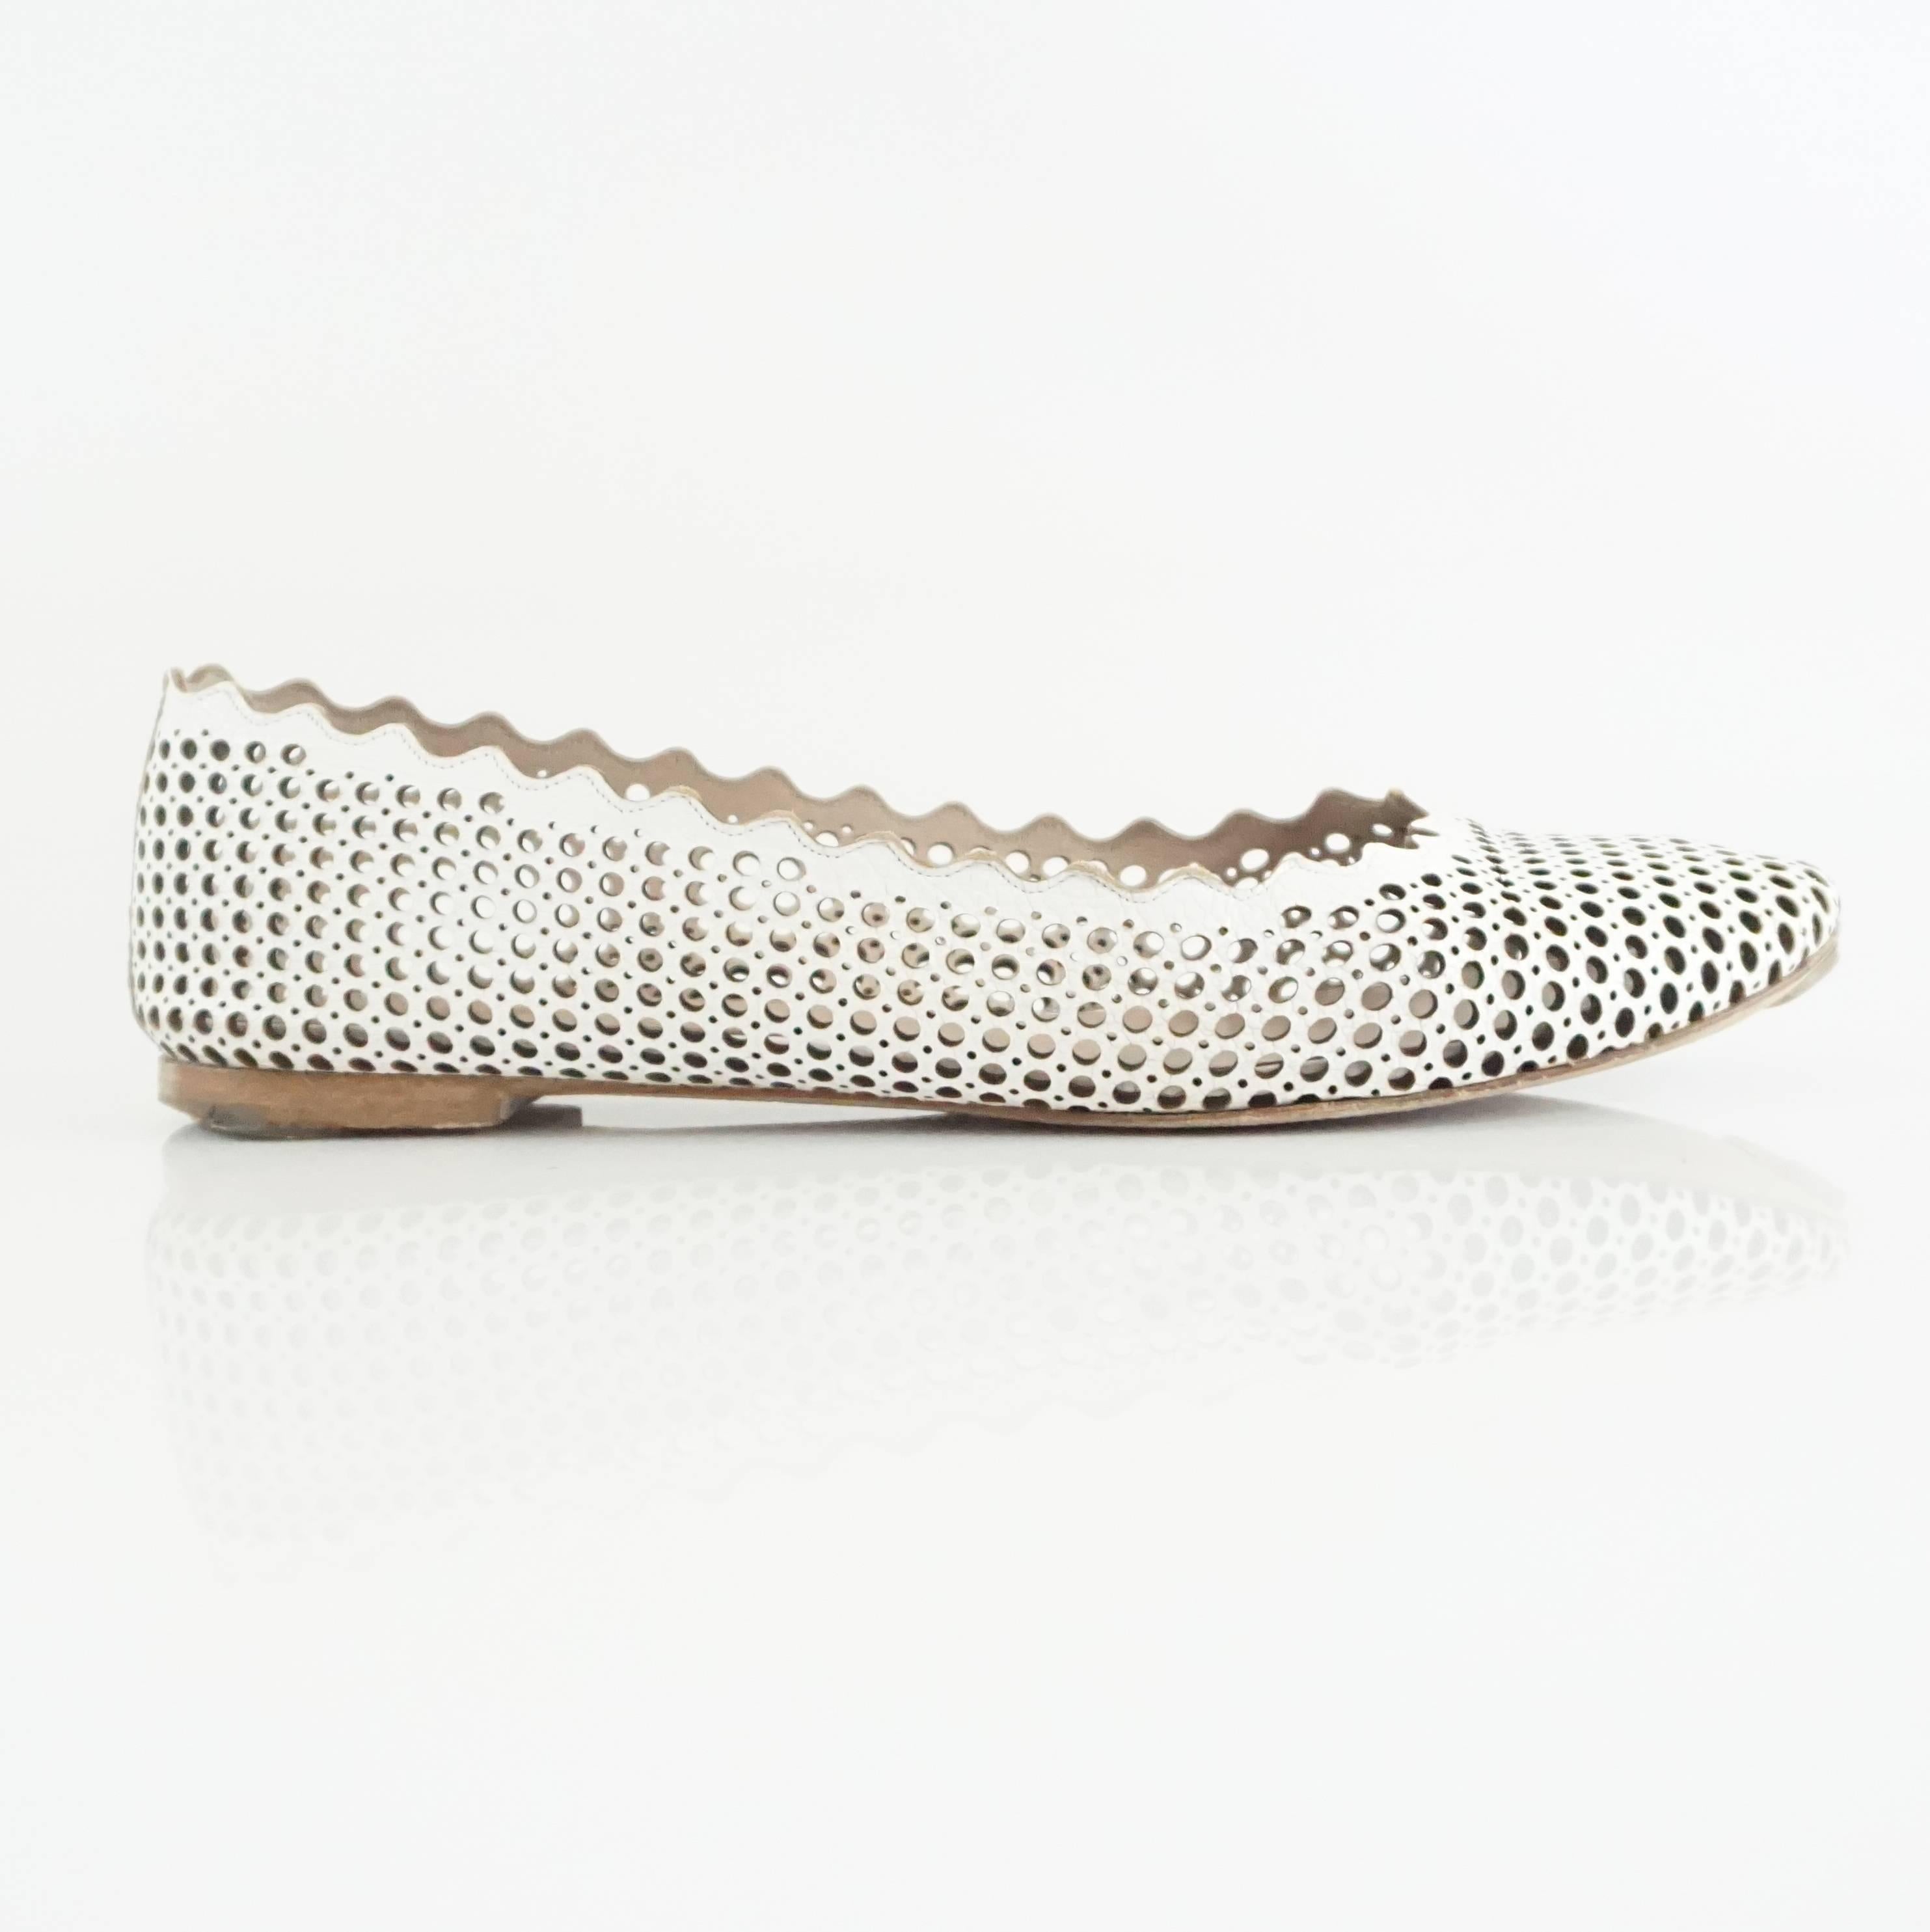 These Chloe white perforated leather flats have a unique look. They have a scalloped trim with different size perforations all along the leather. The flats are in very good condition with some bottom wear as seen in the images. Purchase comes with